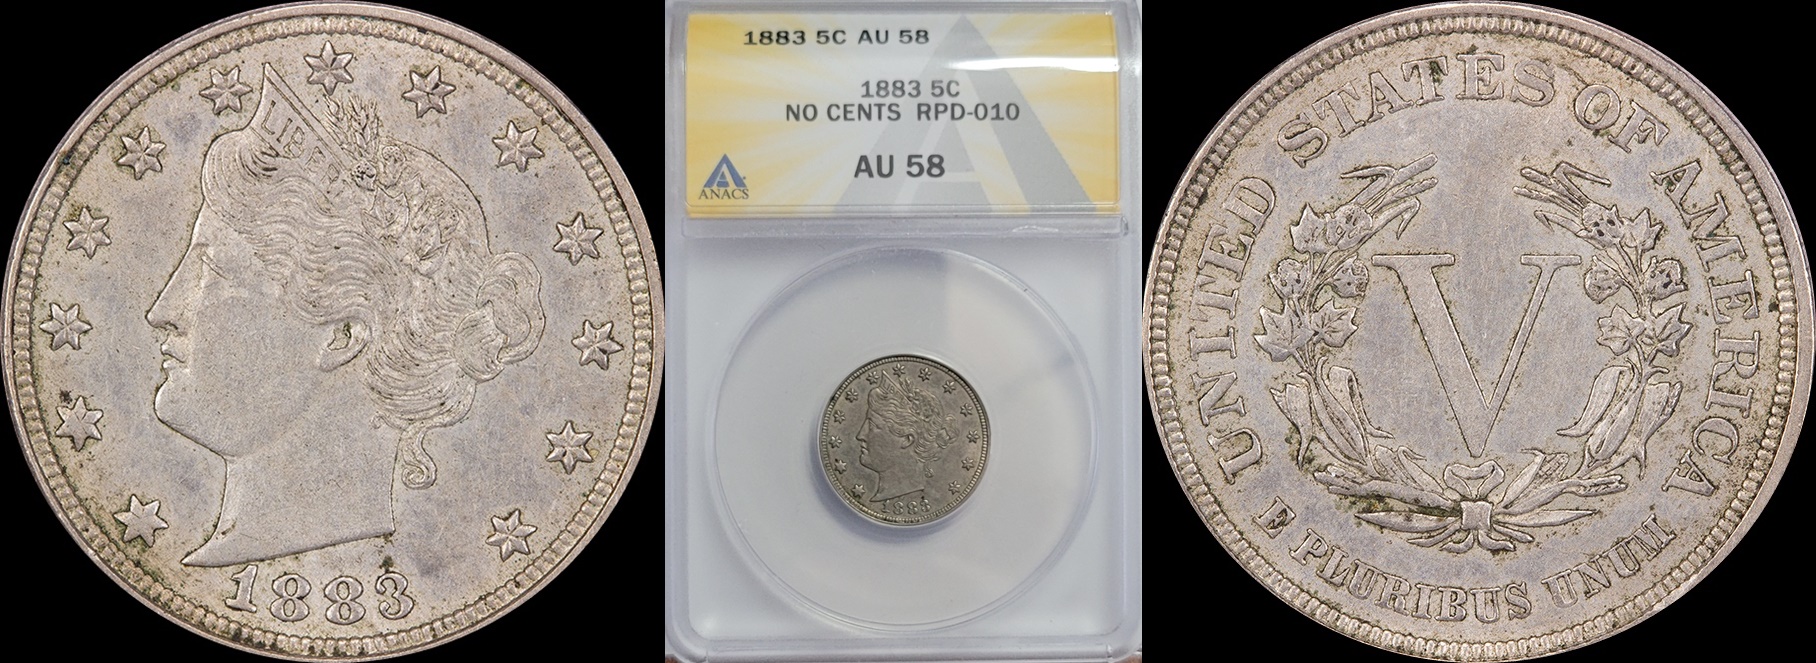 1883 Liberty Nickel AU No Cents, Repunched date 010, ANACS.jpg